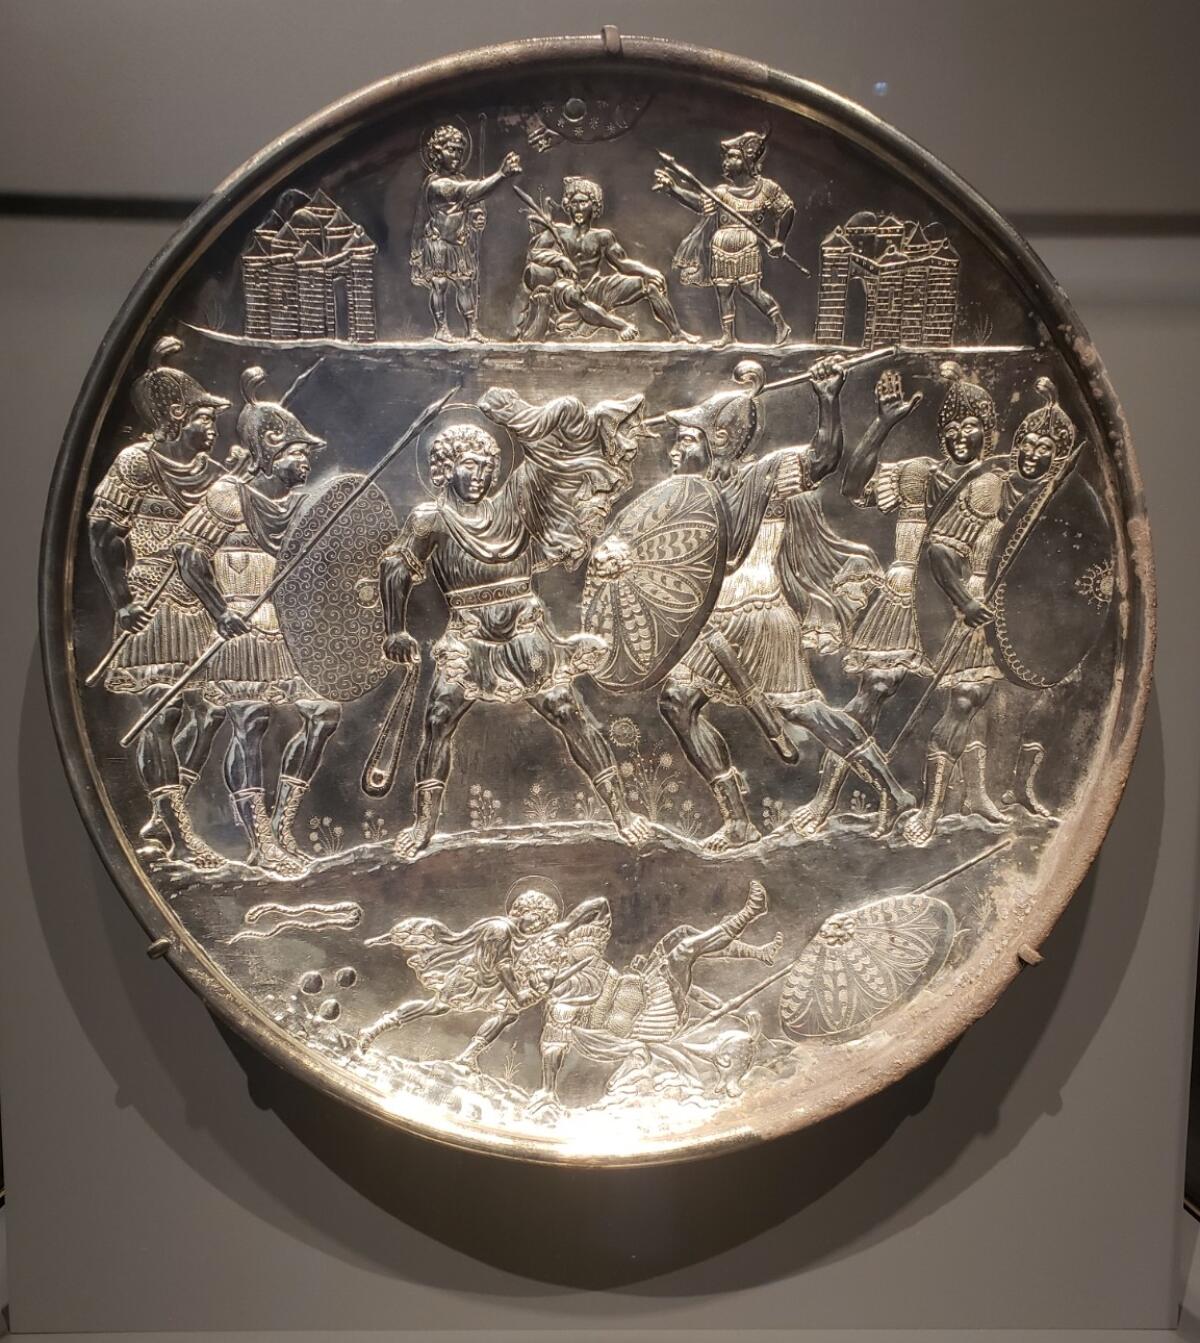 A silver plate shows men fighting.